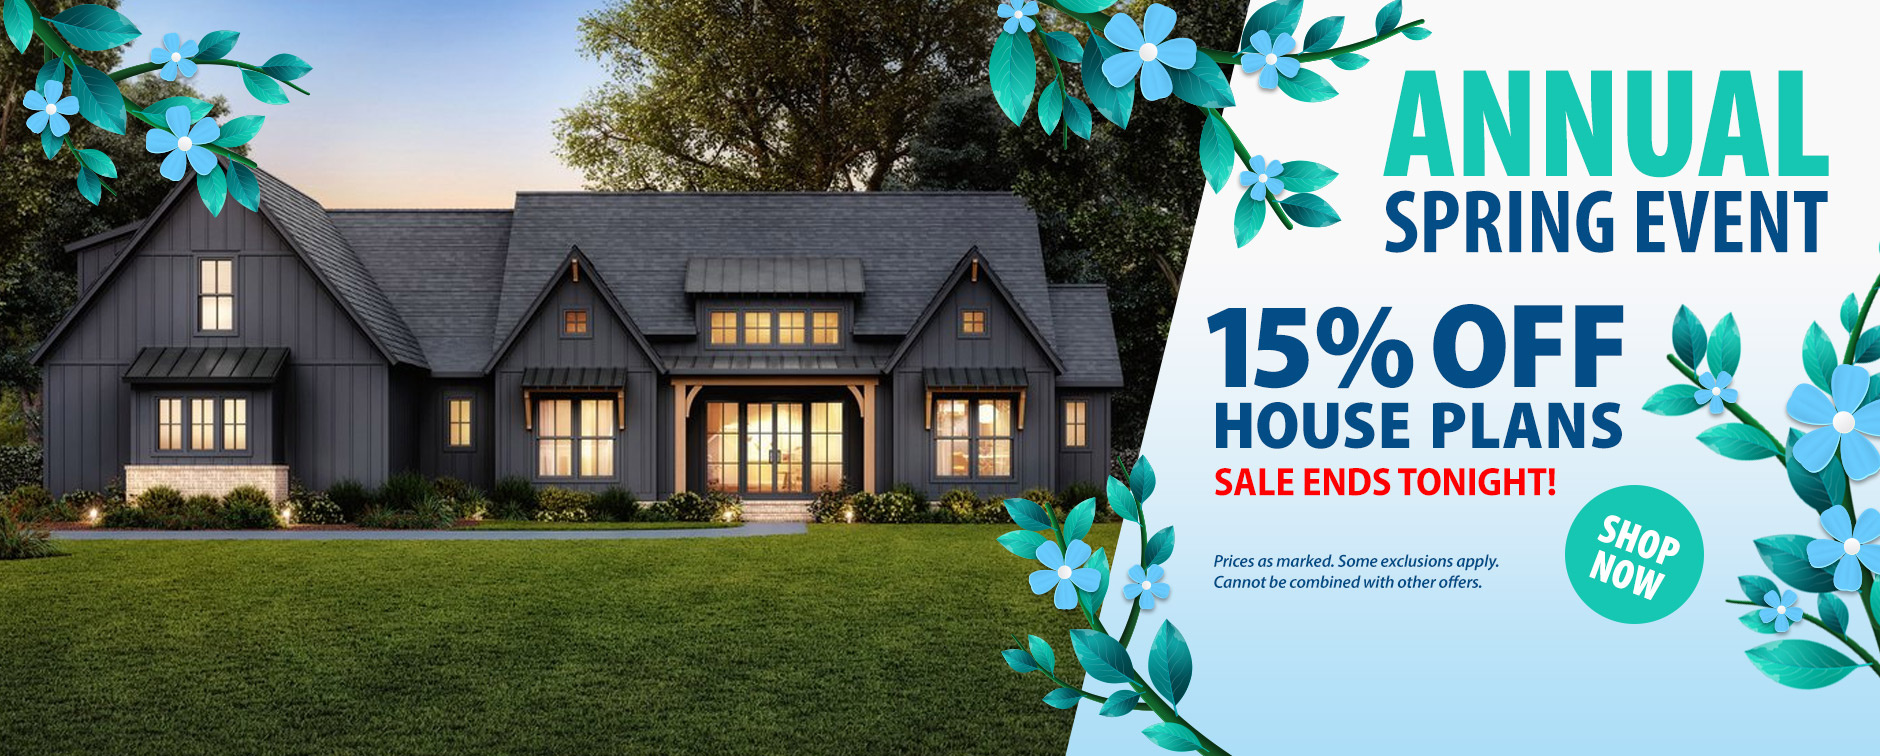 The Annual Spring Sale Ends Tonight. Get 15% Off House Plans.